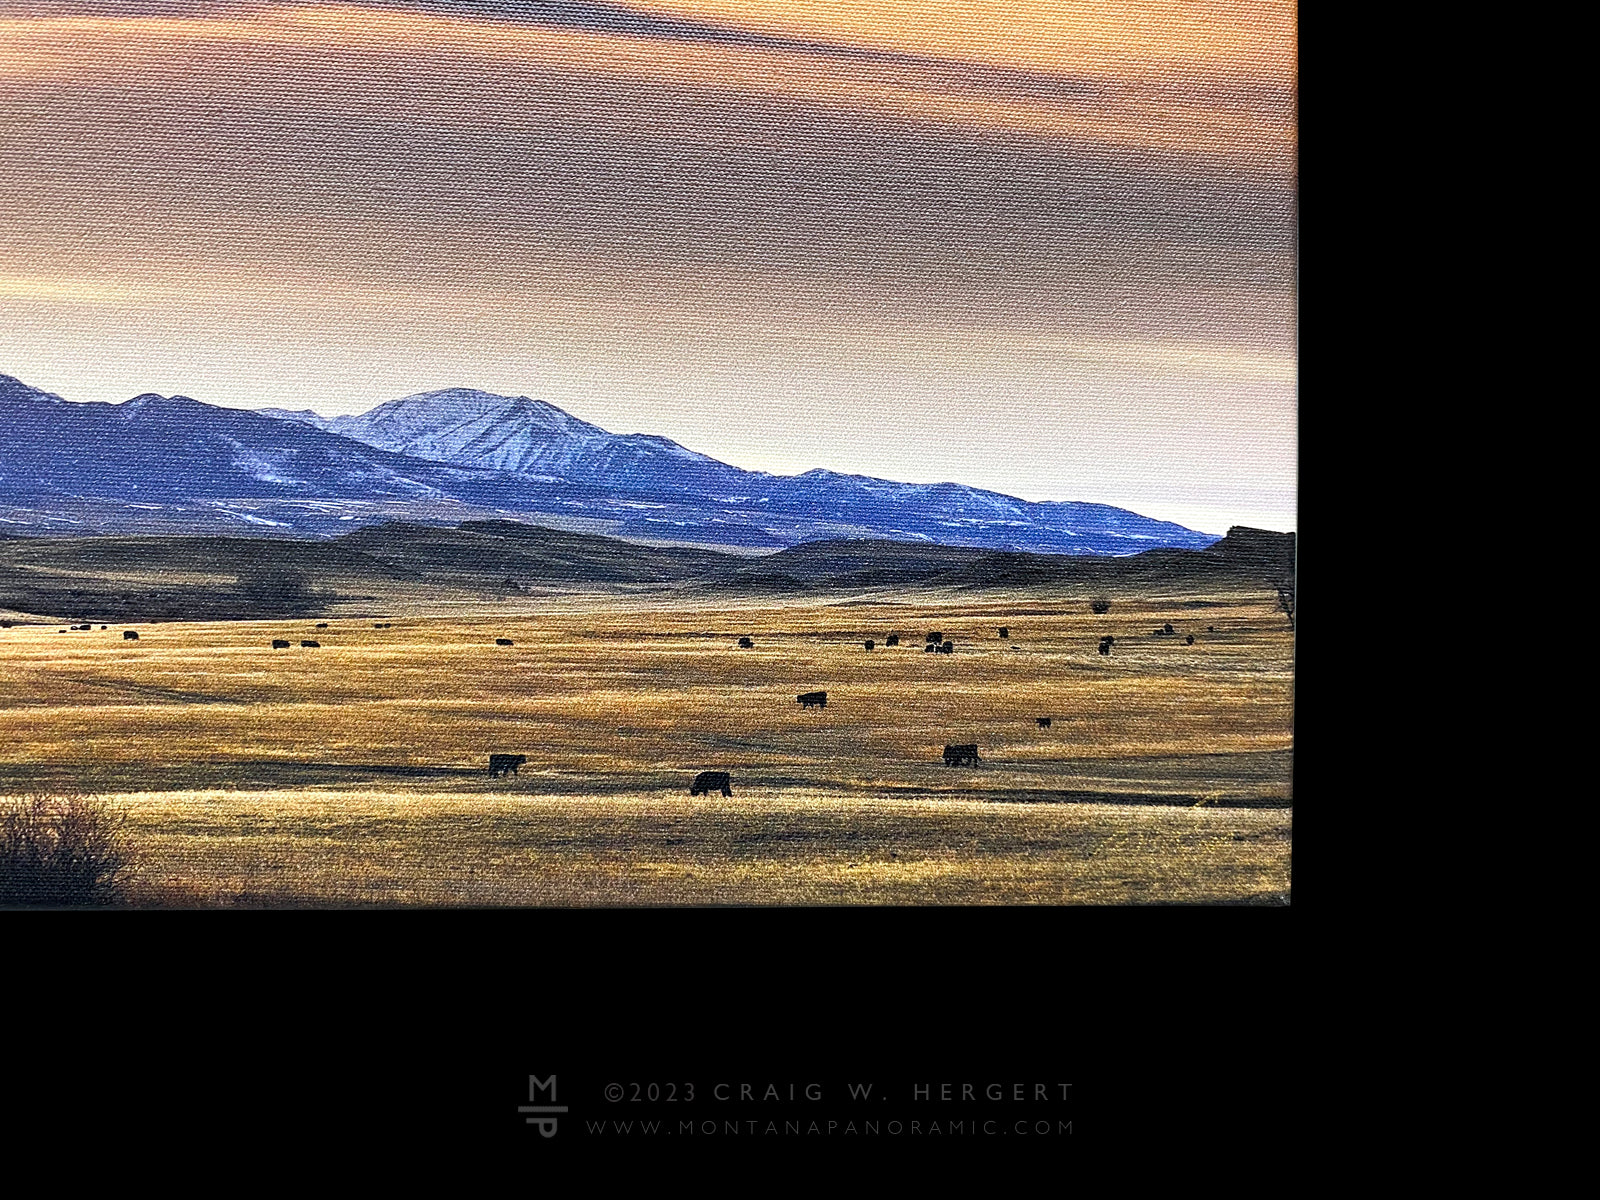 "Northern Crazies Ranch" - Ready to hang - 40"x10" canvas print with extra thick gallery wrap frame